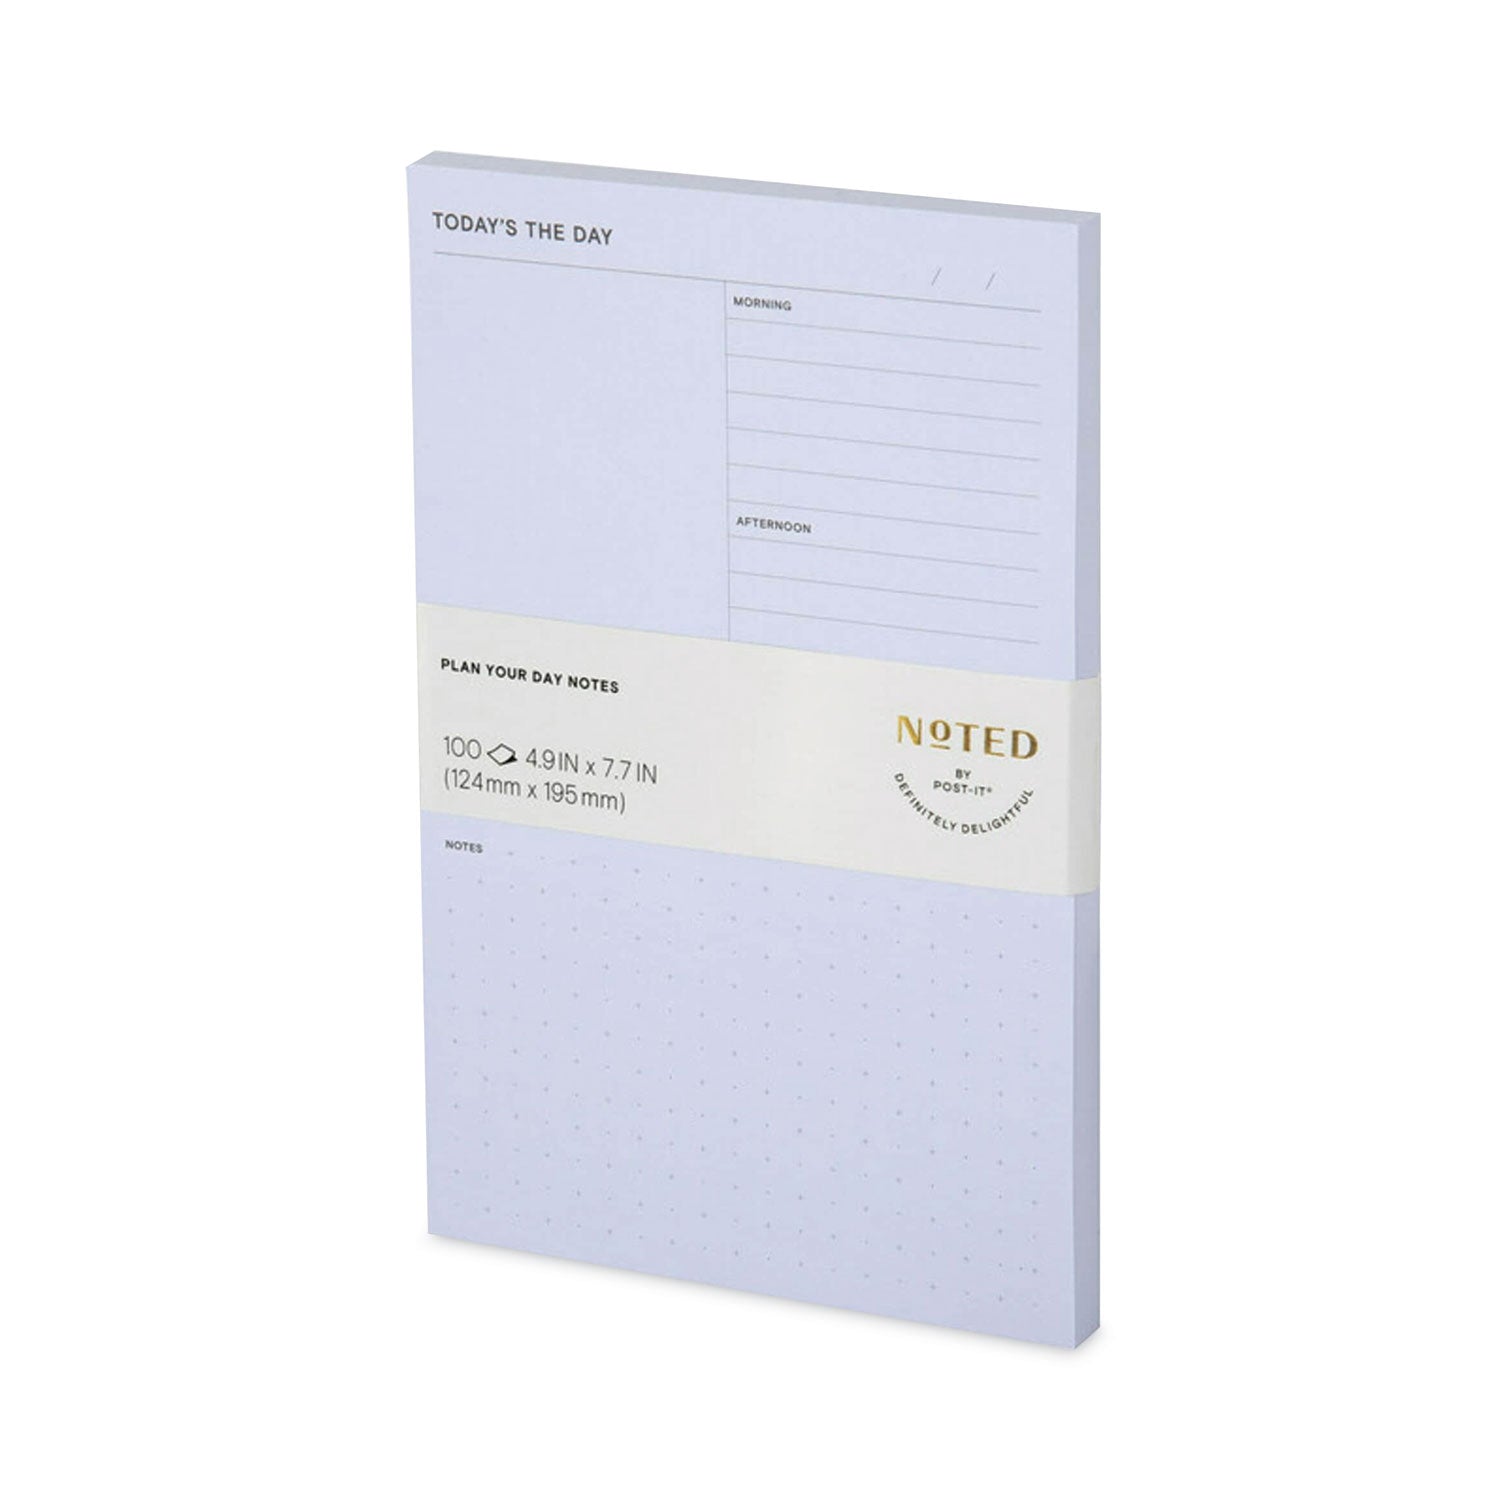 adhesive-daily-planner-sticky-note-pads-daily-planner-format-49-x-77-blue-100-sheets-pad_mmm58blu - 3